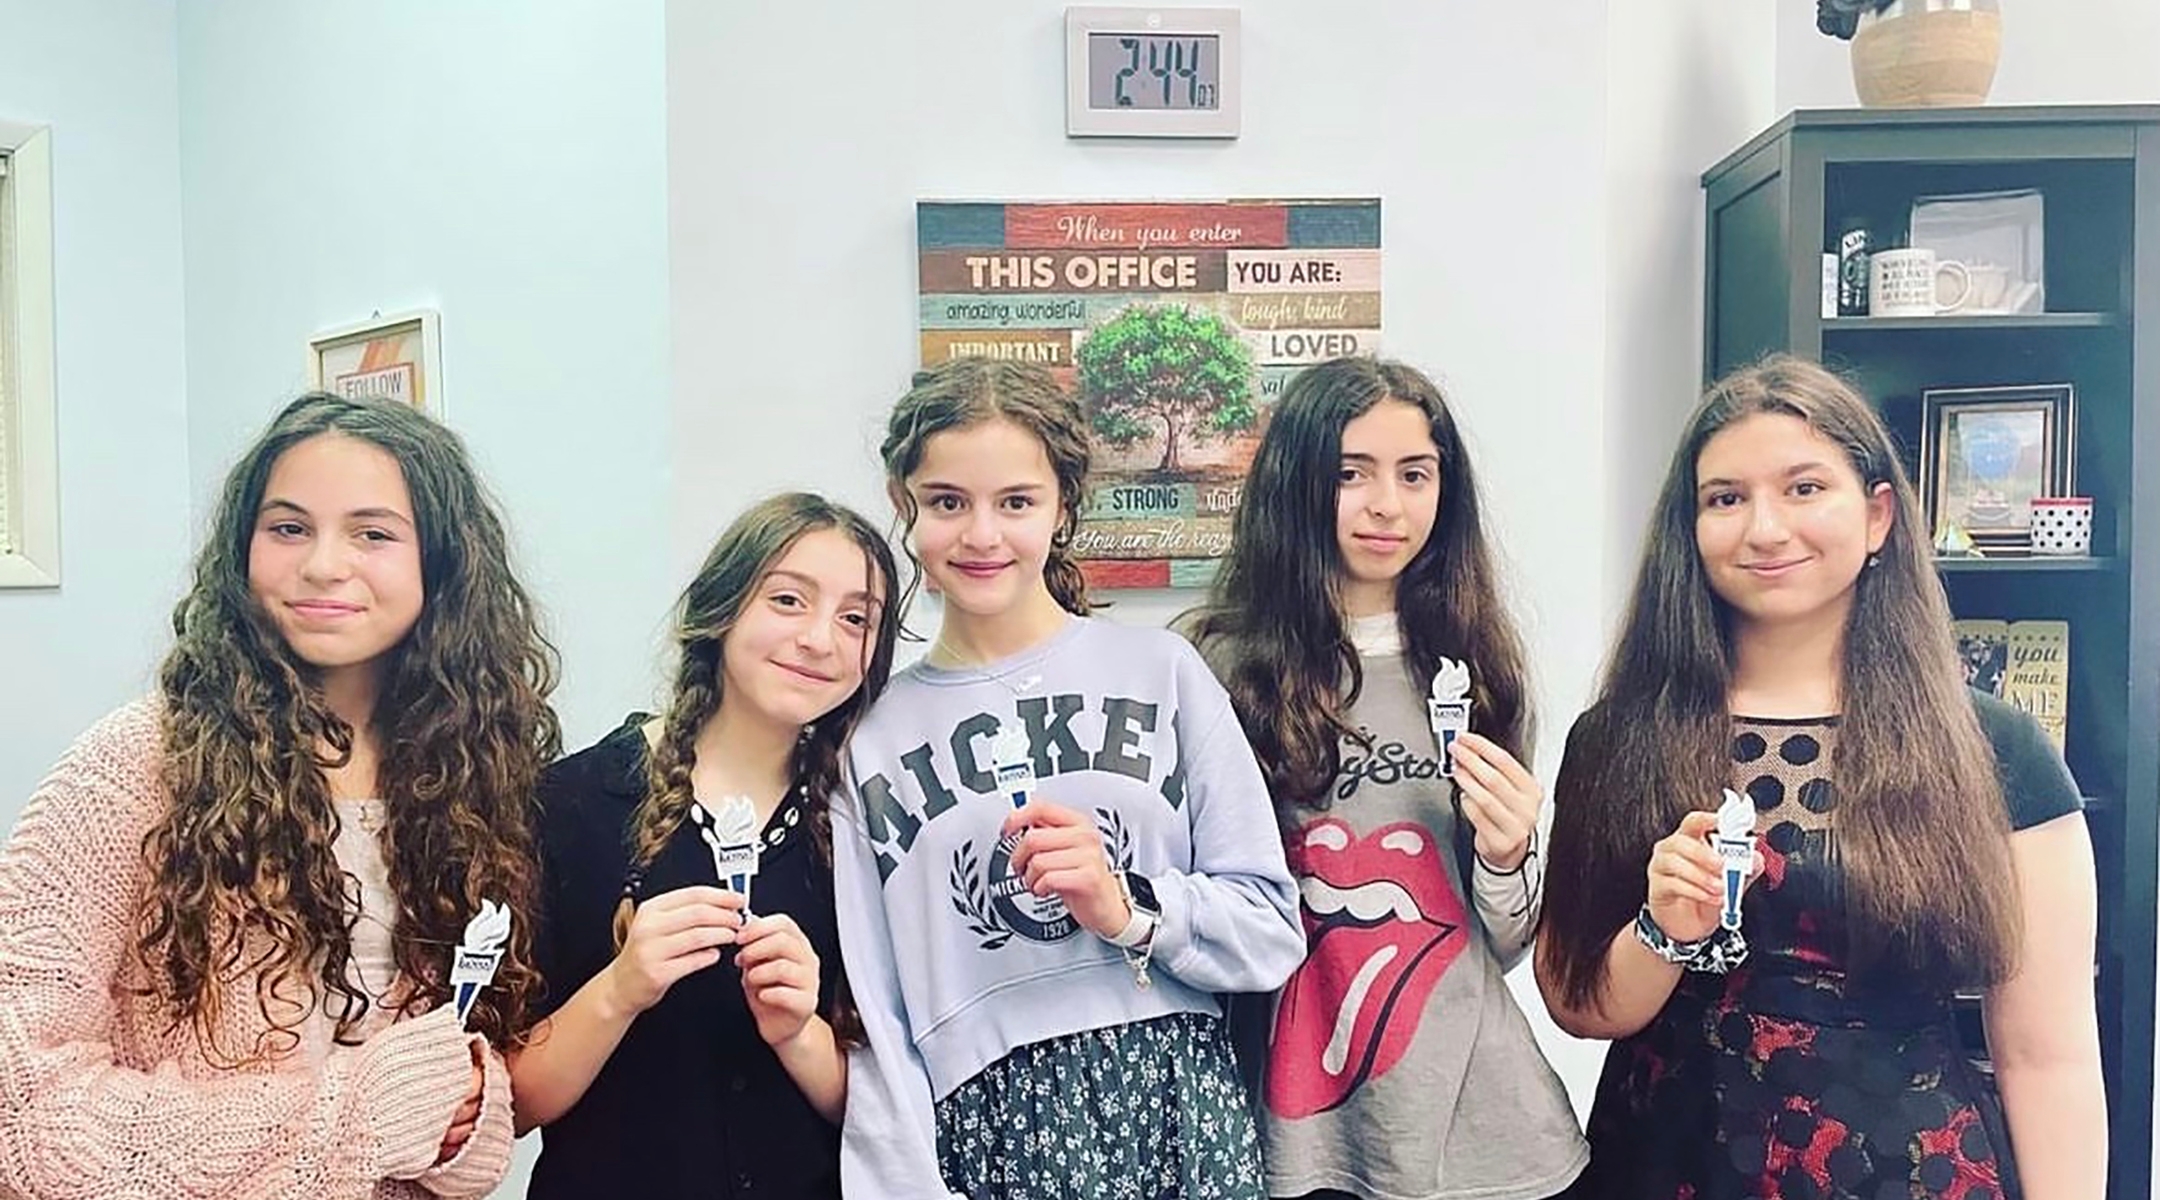 When their Jewish day schools closed, these teens had to learn to adjust